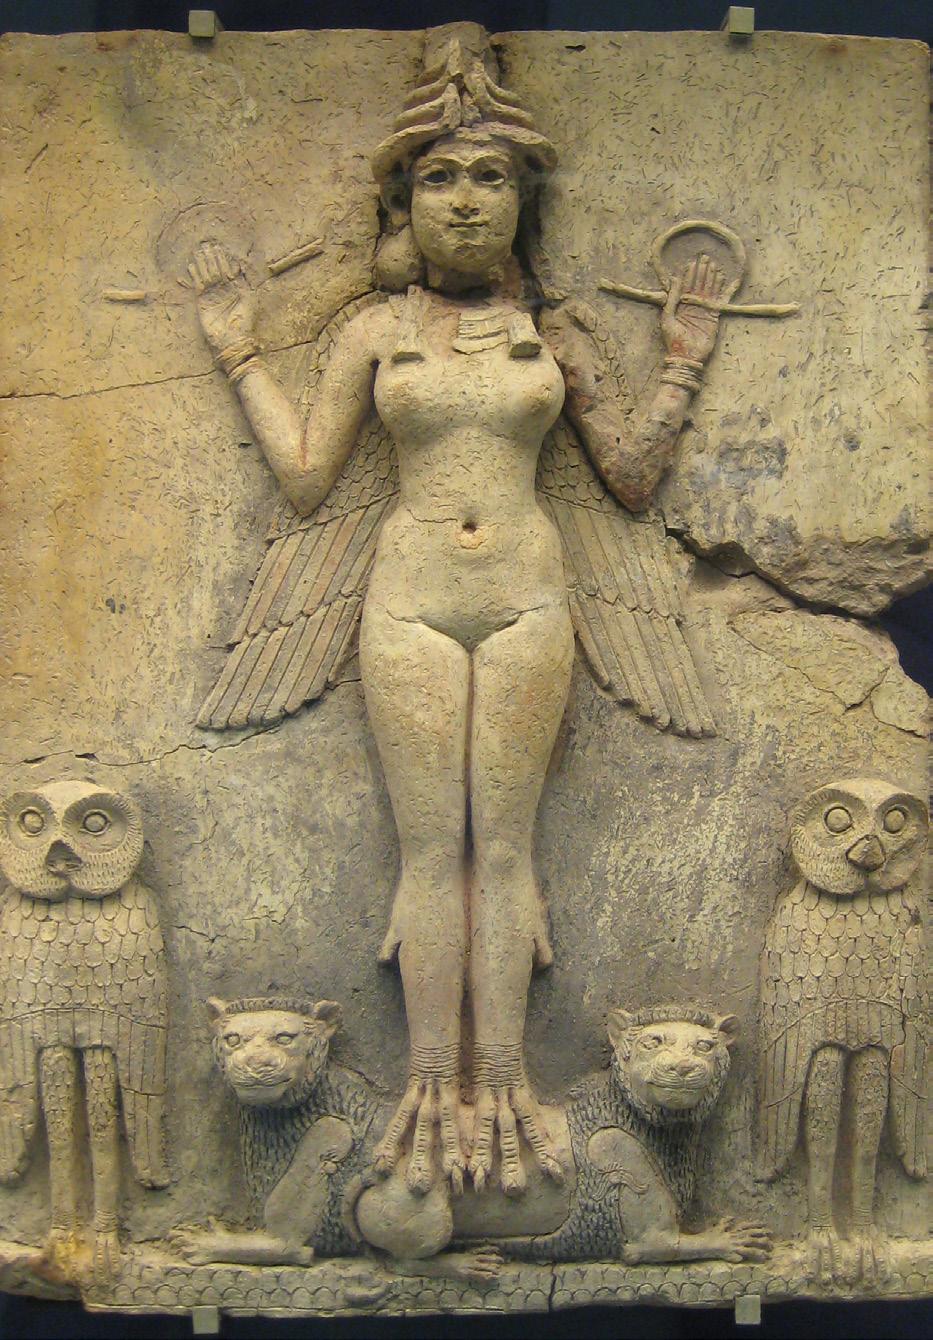 The goddess Ishtar, whose aromatic herb